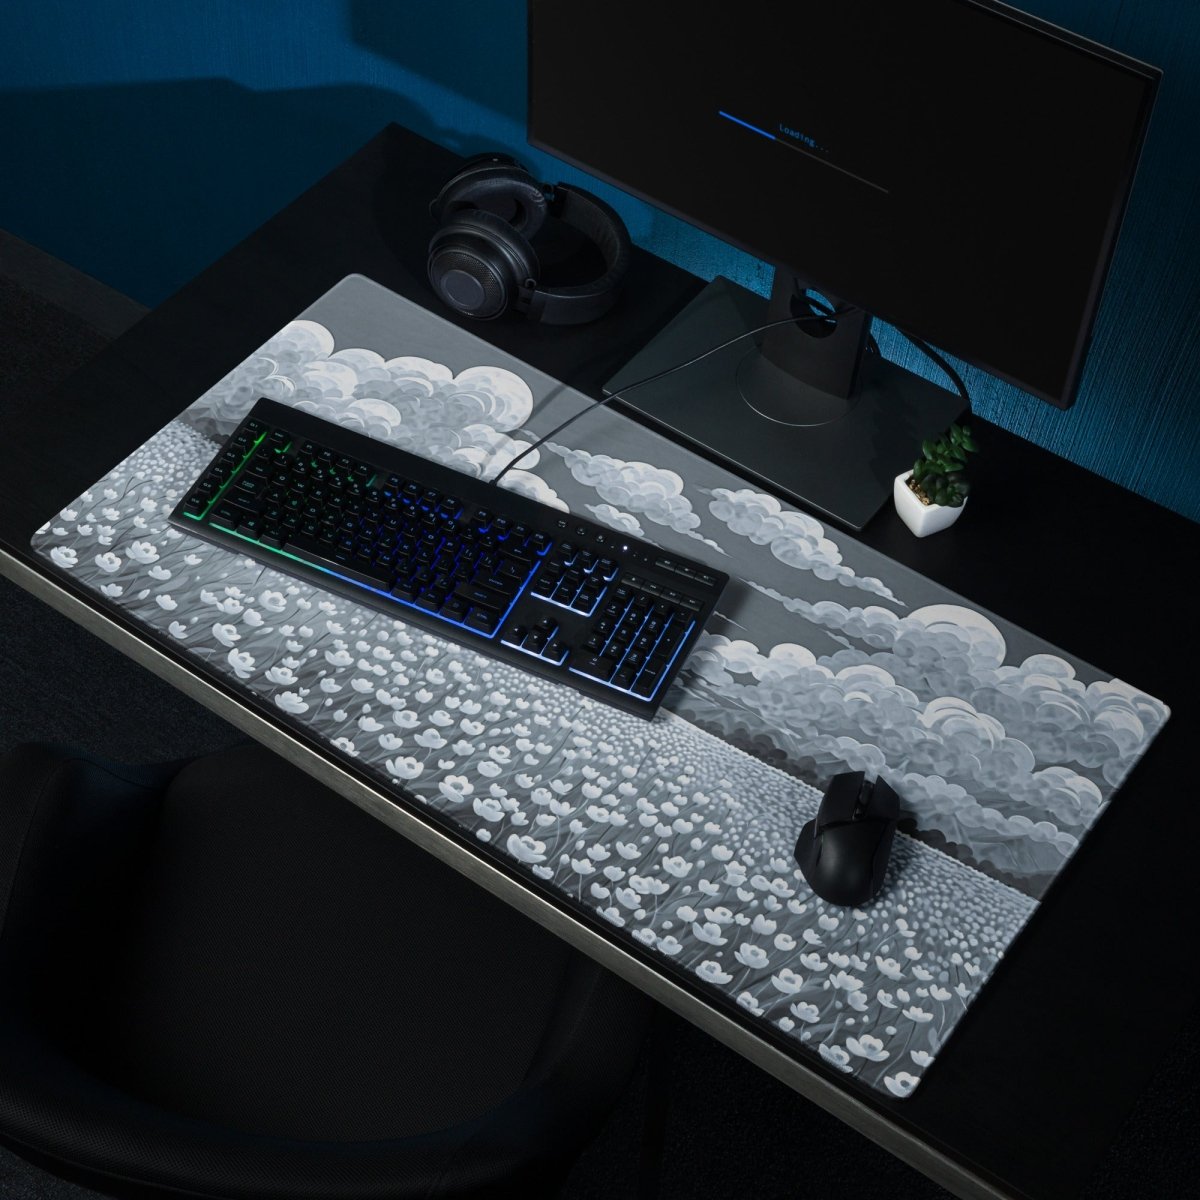 Monochrome garden - Gaming mouse pad - Ever colorful